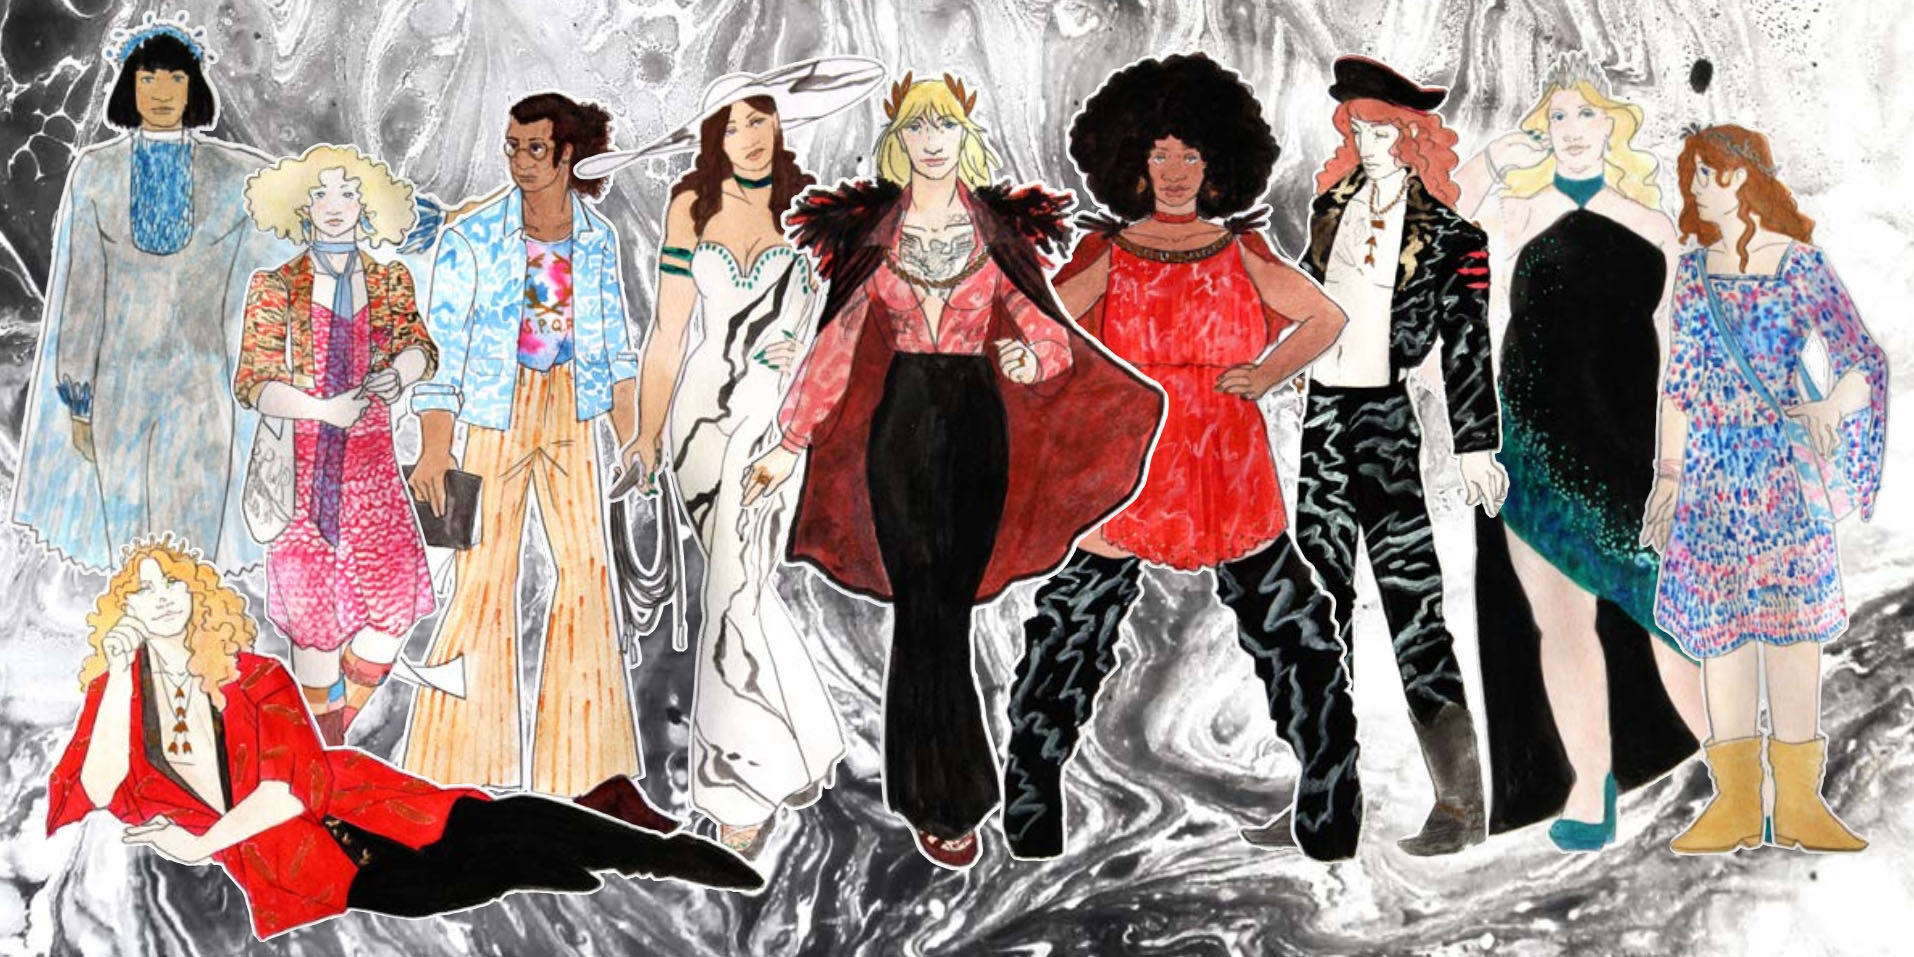 A digitally collaged lineup of ten character illustrations. They have various outfits but all of them resemble 1970s pop- and rockstars such as Bianca Jagger, Farrah Fawcett, Robert Plant or Chaka Khan.